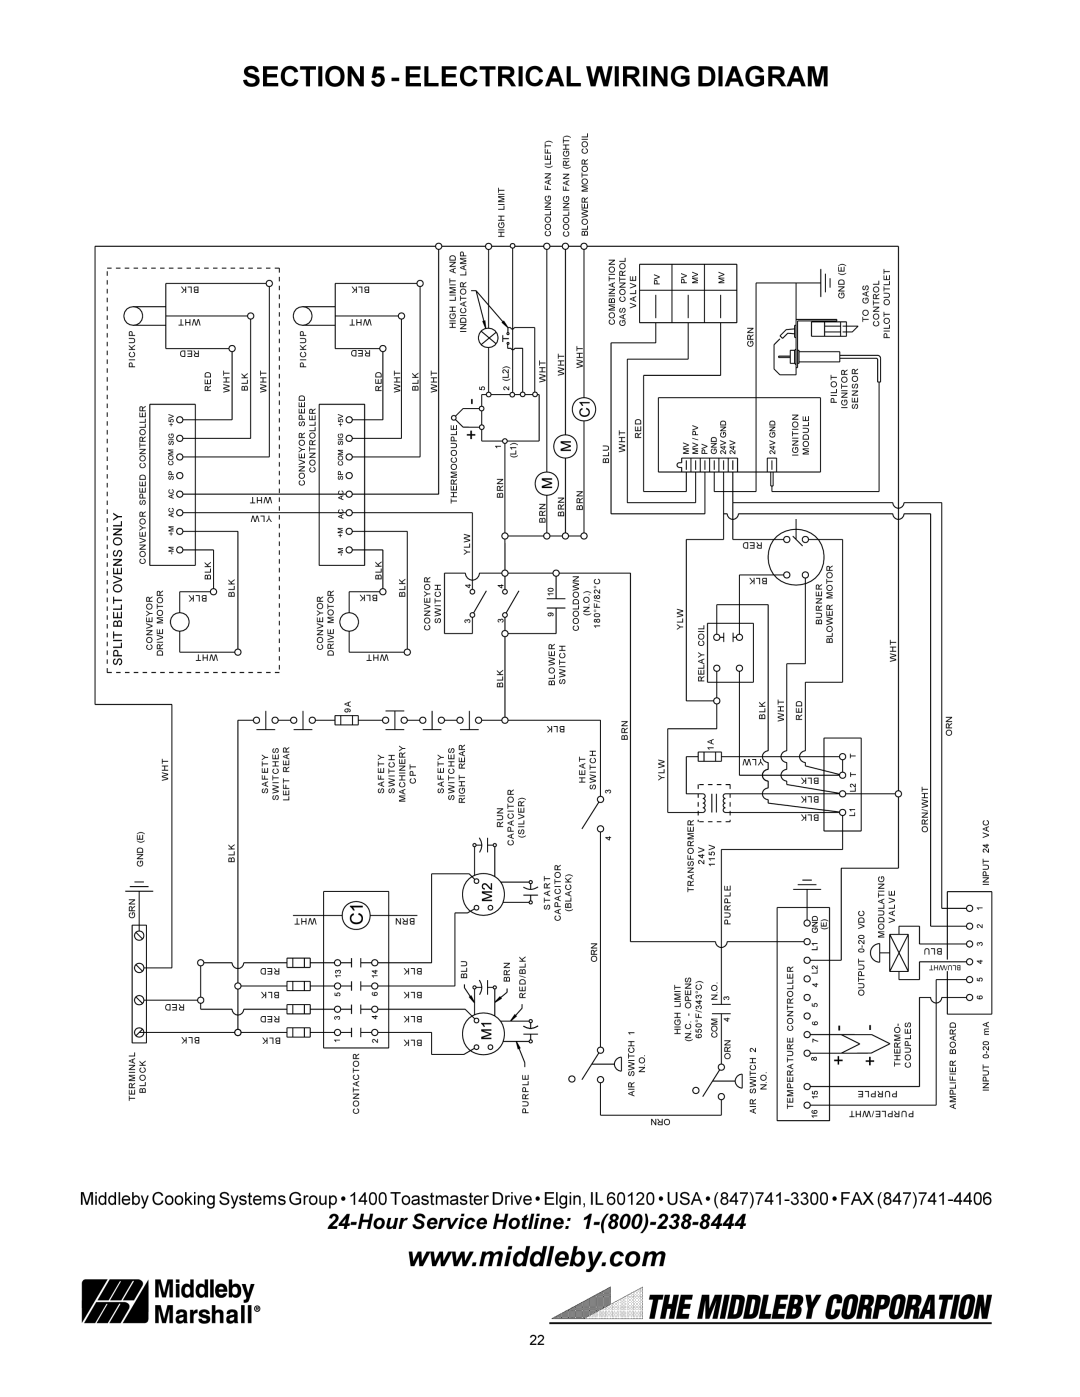 Middleby Marshall PS570S installation manual Electrical Wiring Diagram, Hour Service Hotline, Modulating Valve, Blu/Wht 